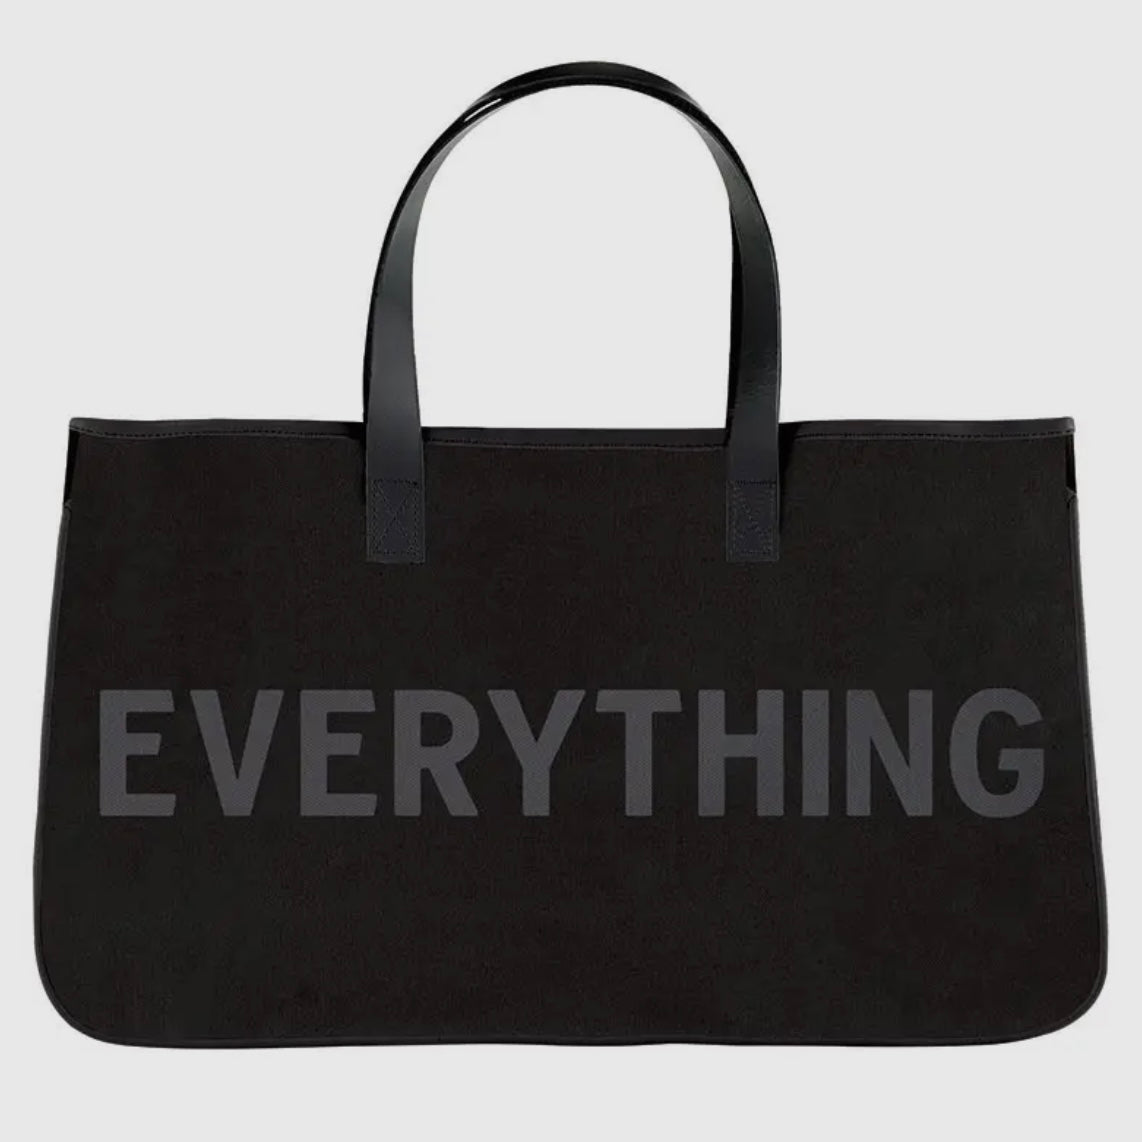 Black Canvas Tote - Everything